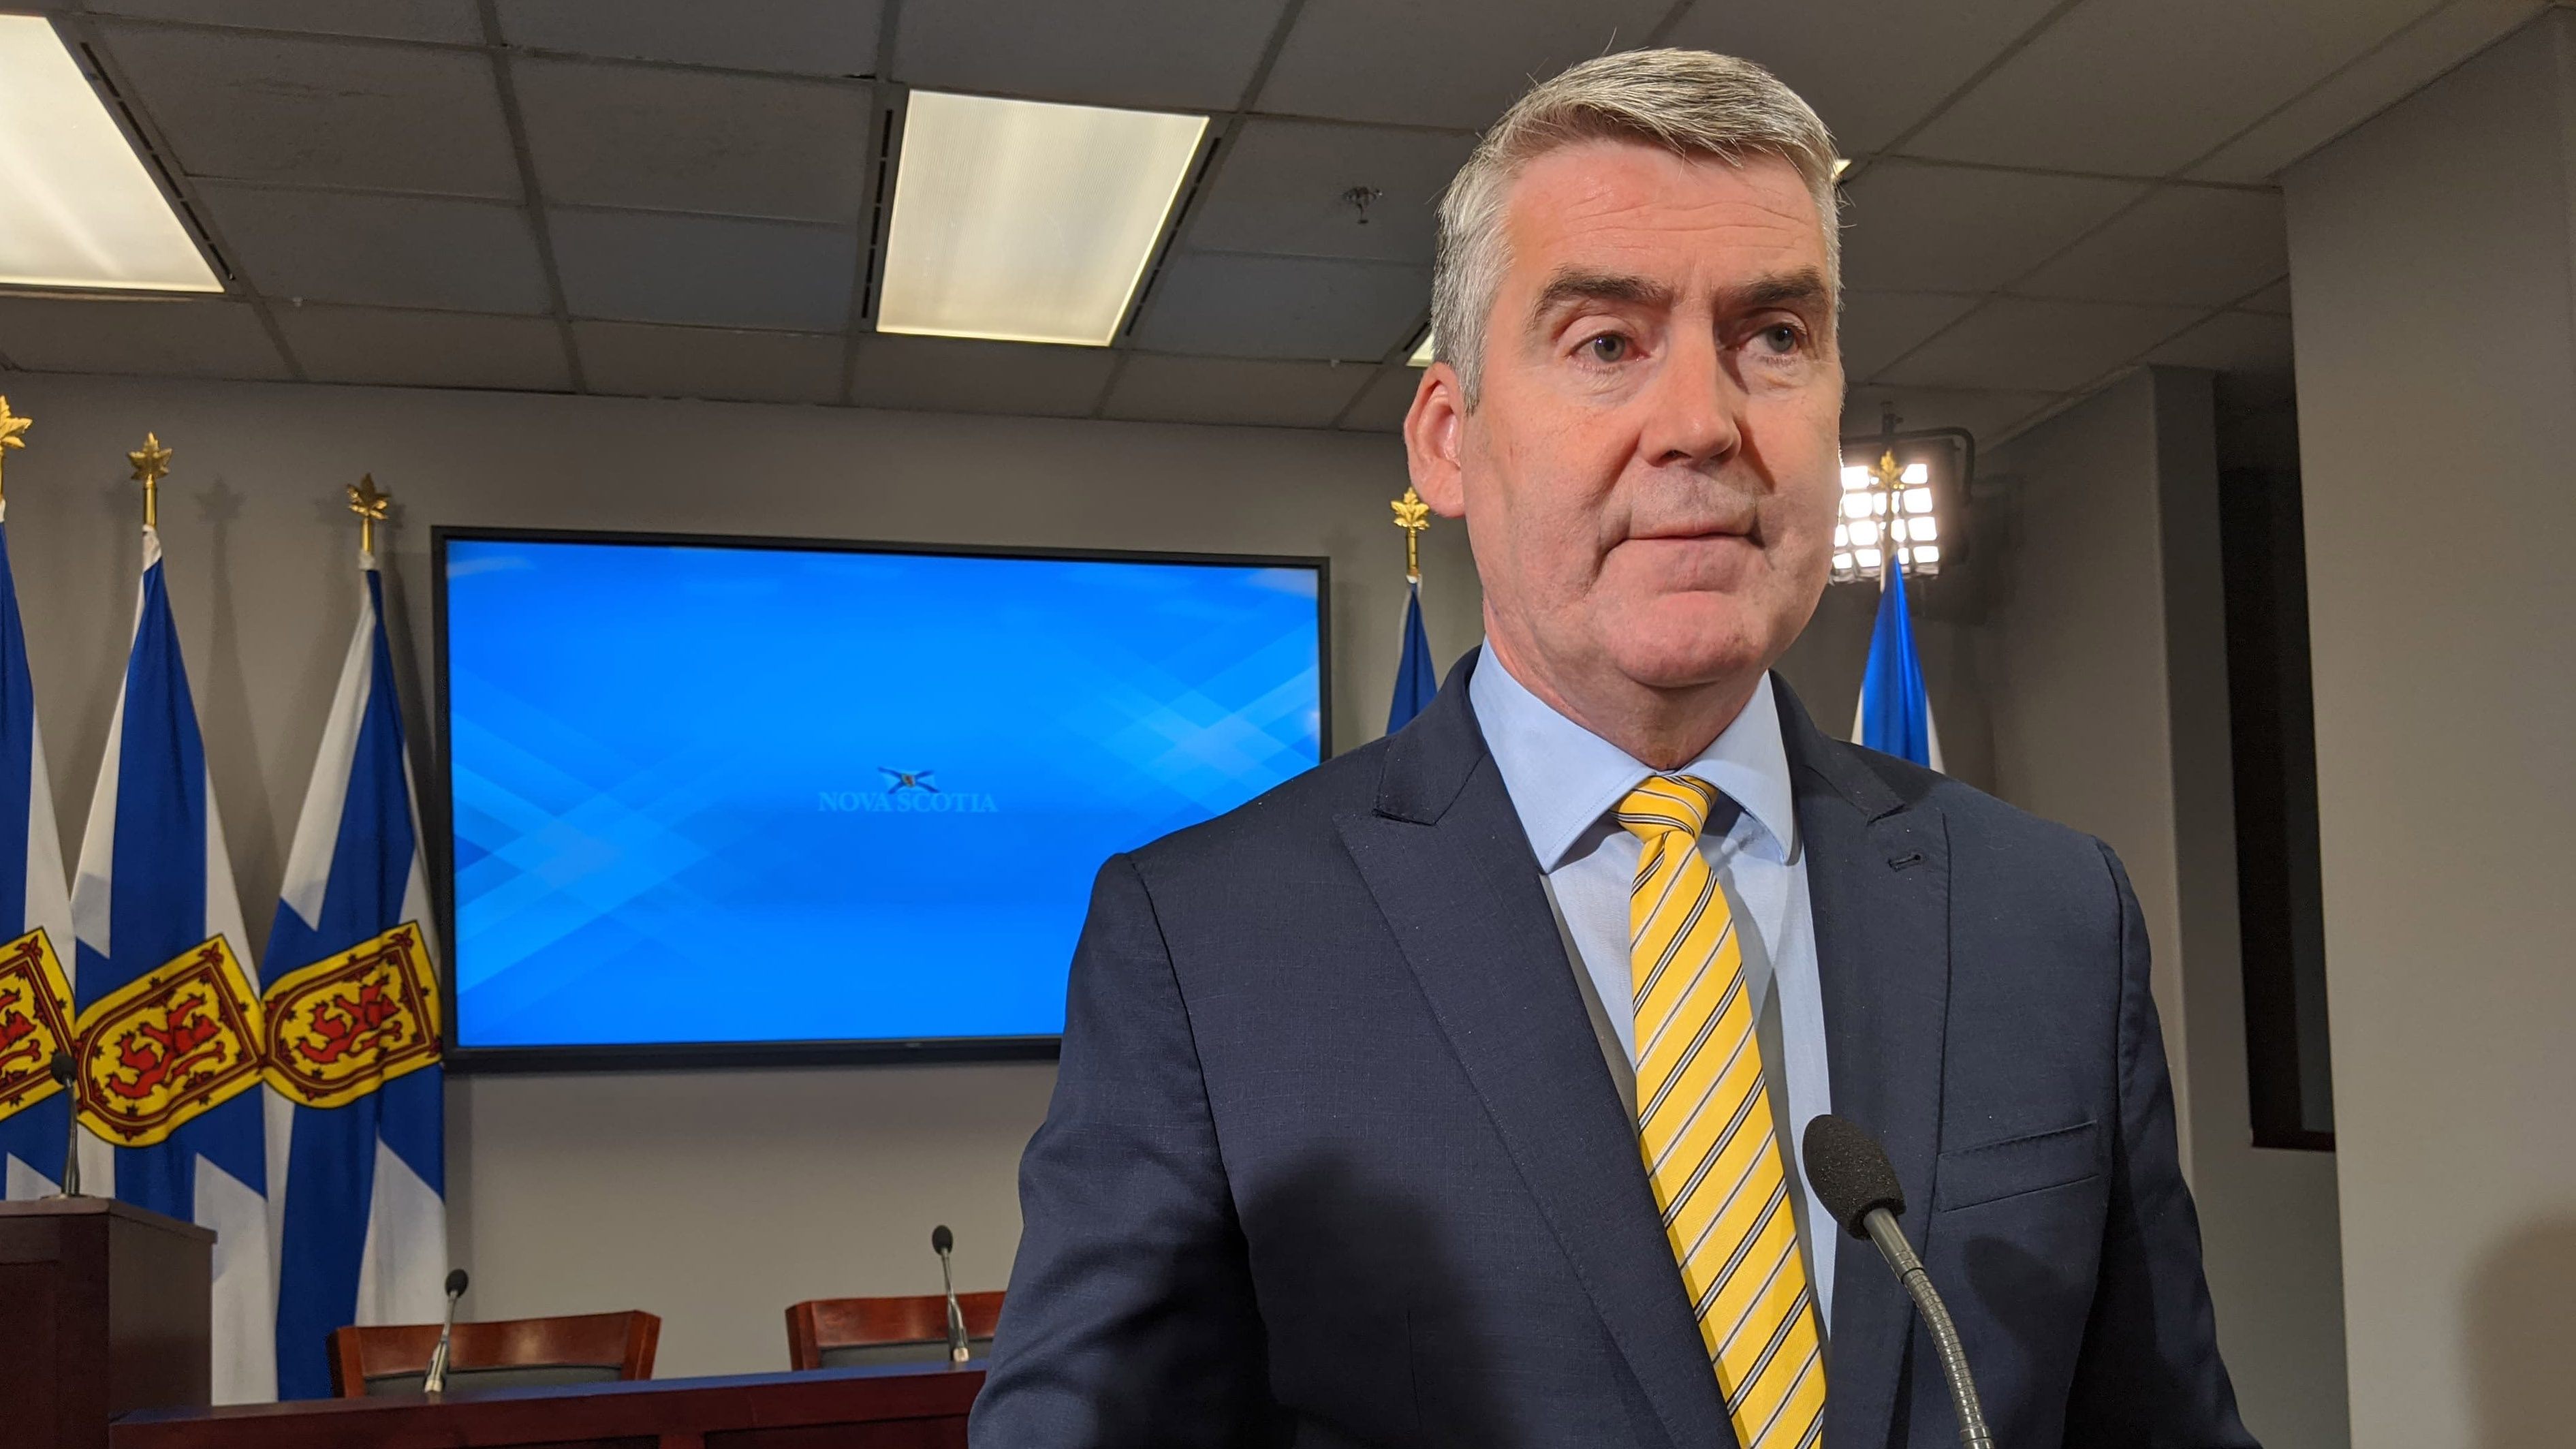 Premier Stephen McNeil says that no new effluent will enter Boat Harbour after Jan. 31.